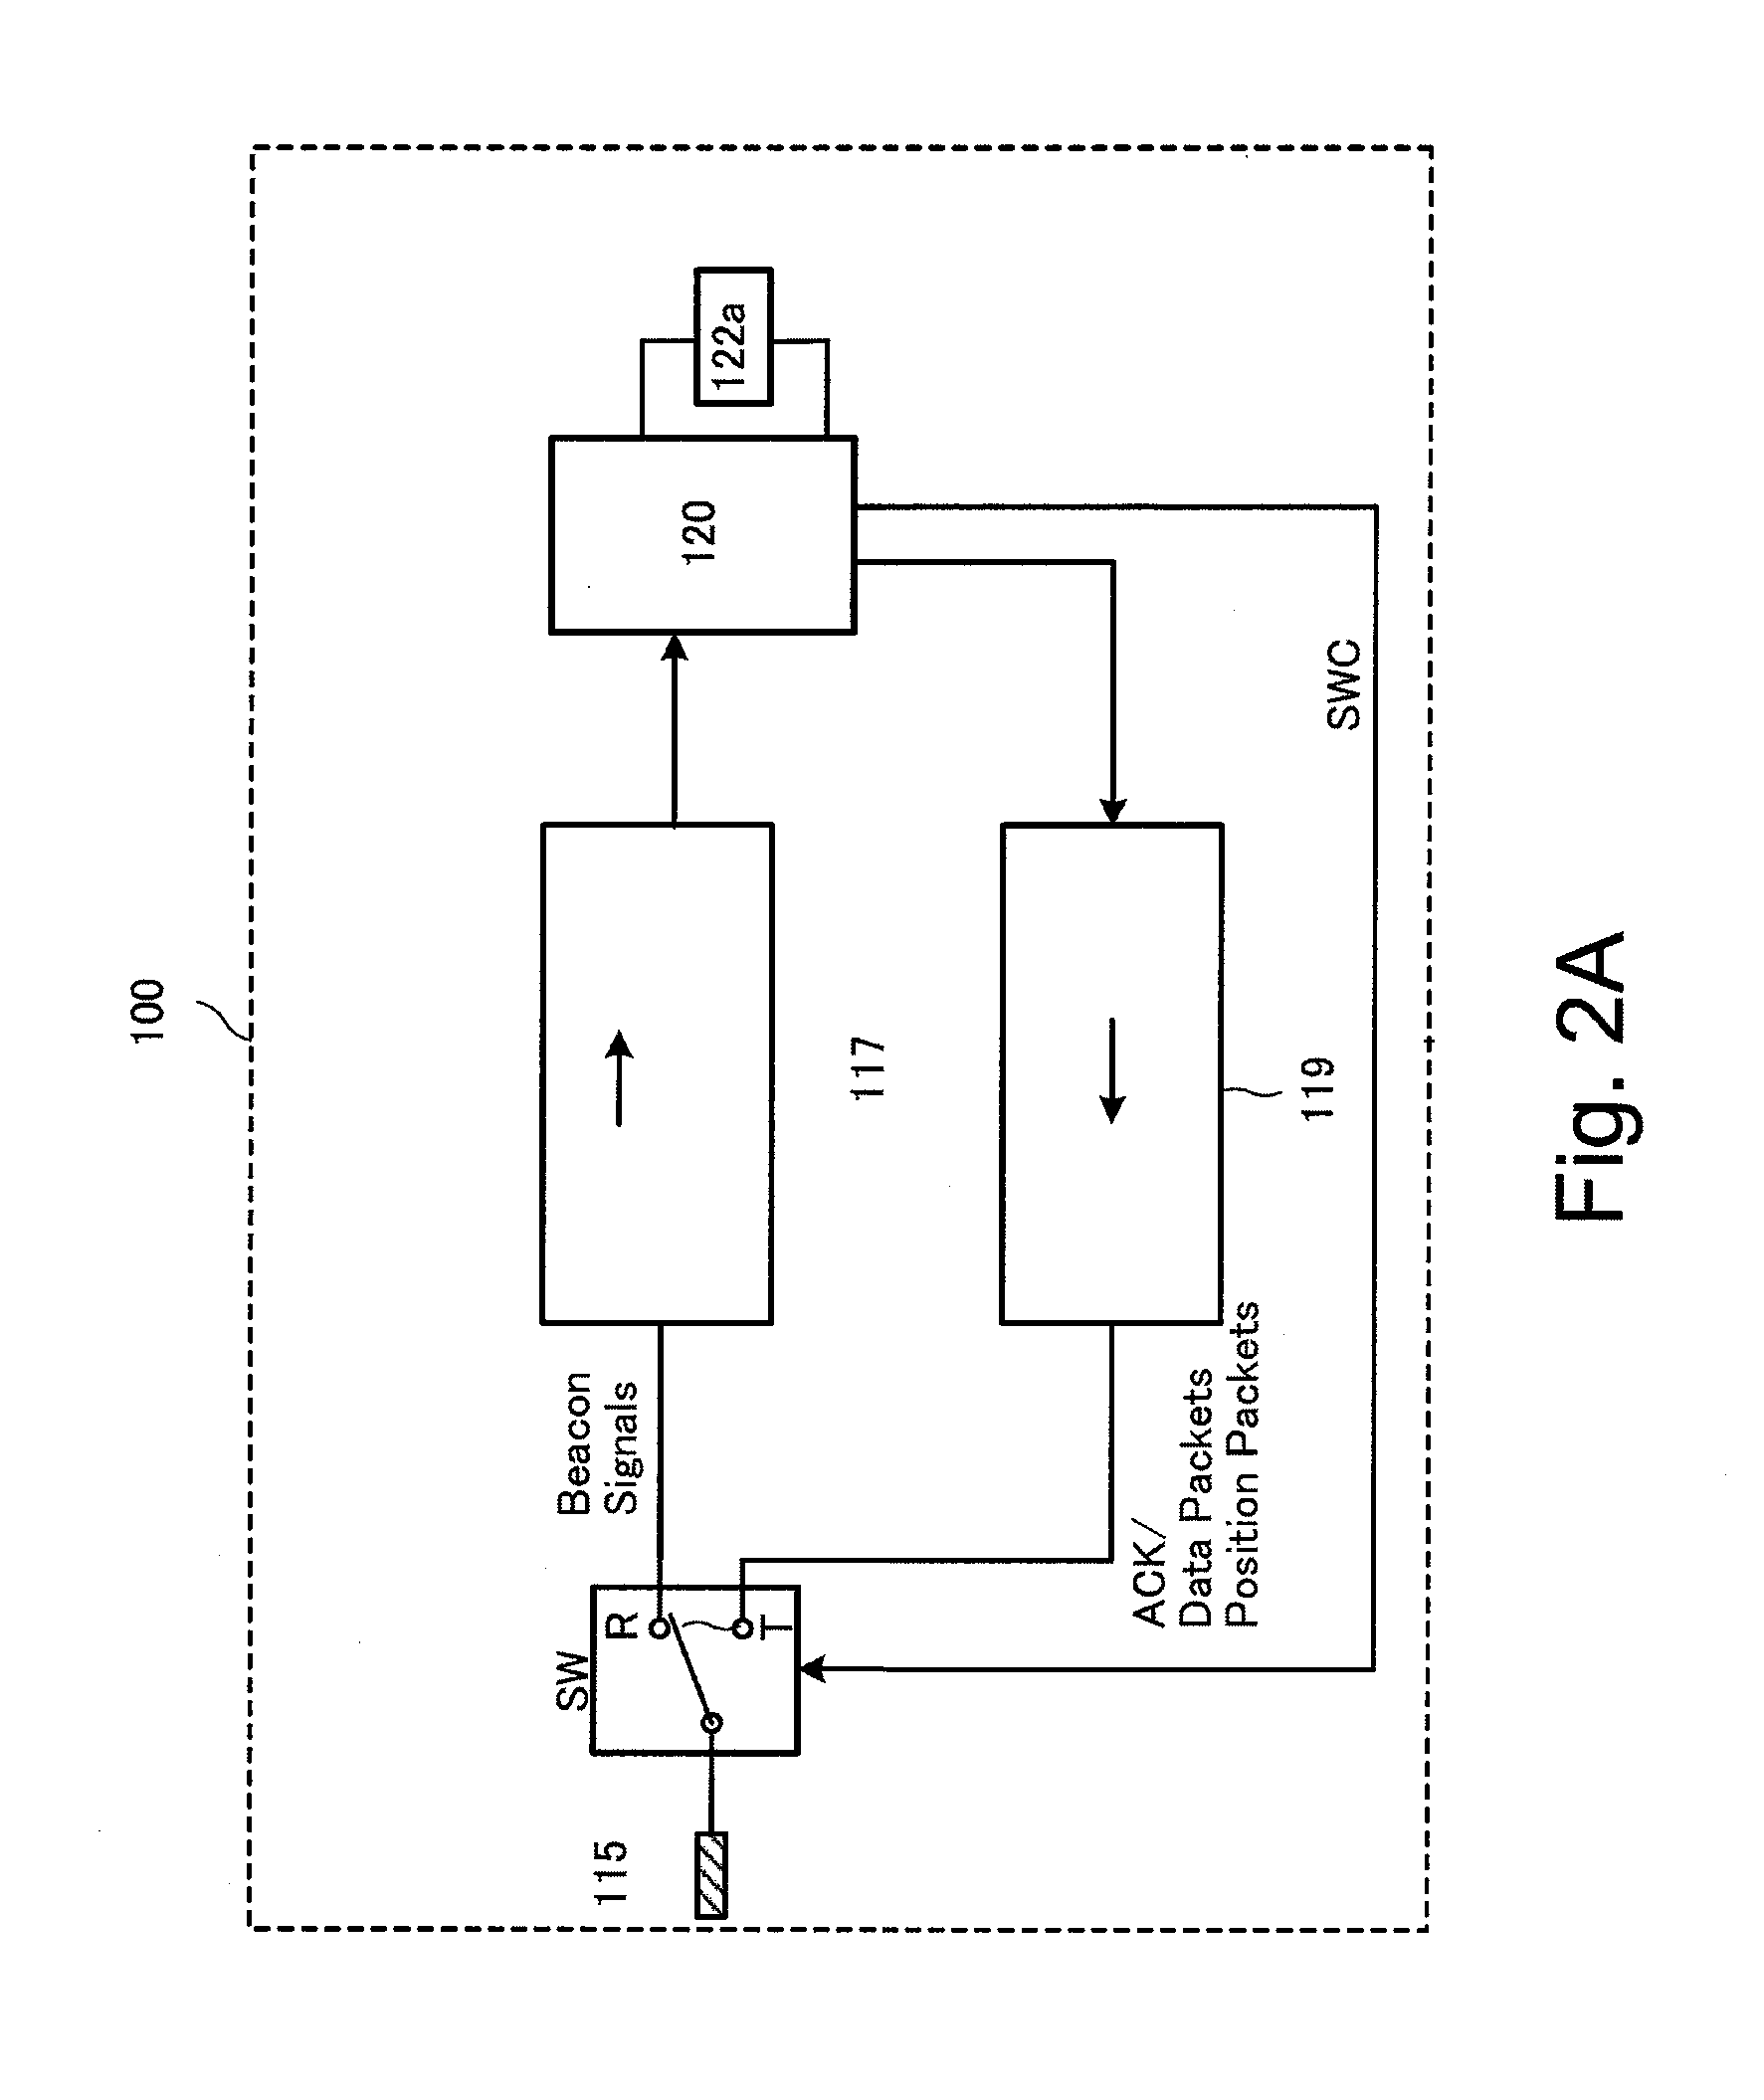 System and method for bidirectional communication between stylus and stylus sensor controller